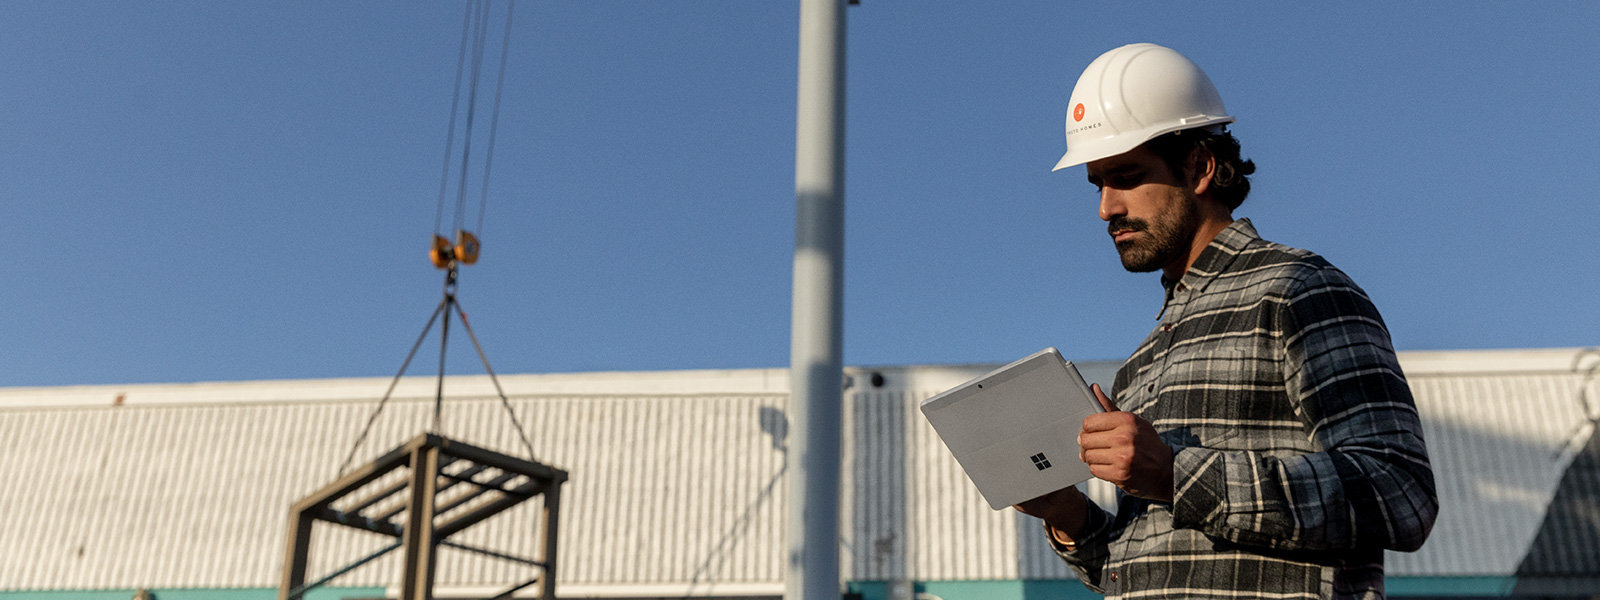 A worker in a hard hat is shown working on a Surface Go 2 in an industrial setting